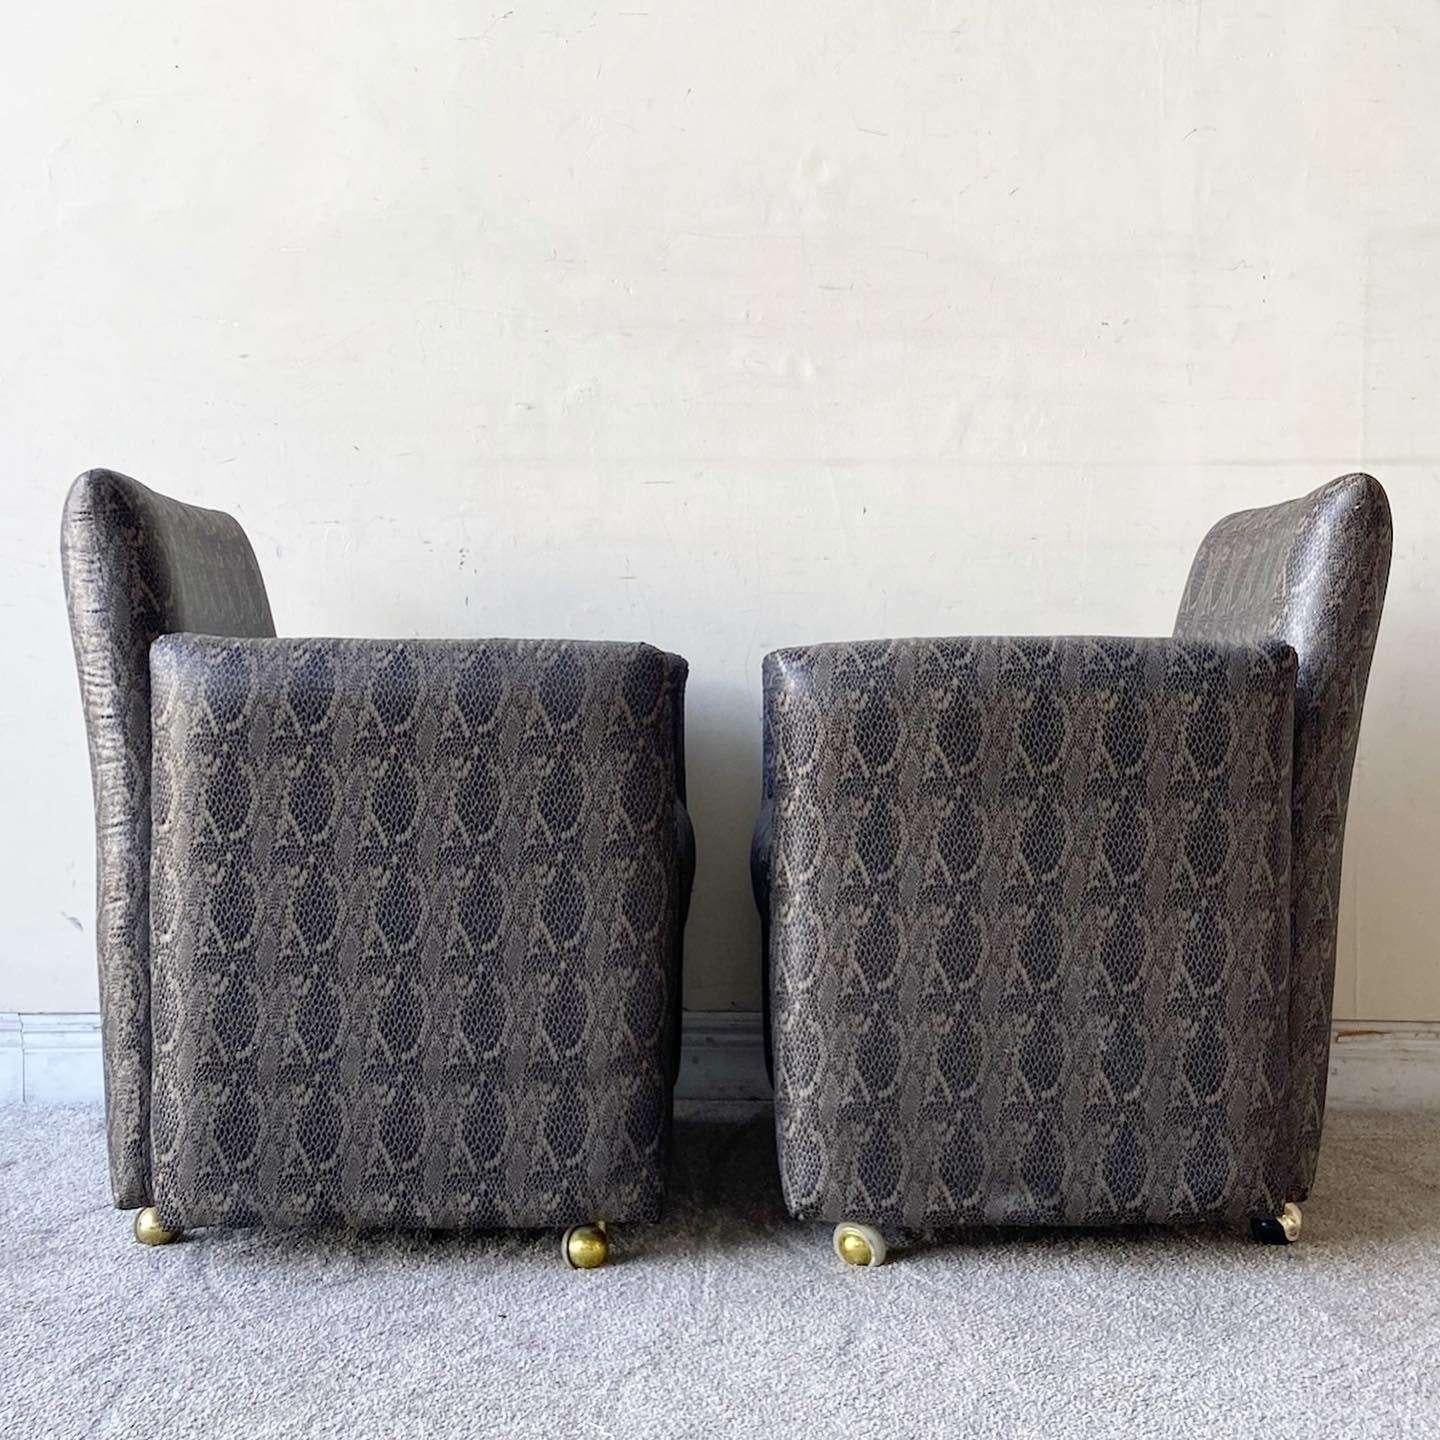 Post-Modern Postmodern Faux Snake Skin Upholstered Chiclet Arm Chairs on Wheels - a Pair